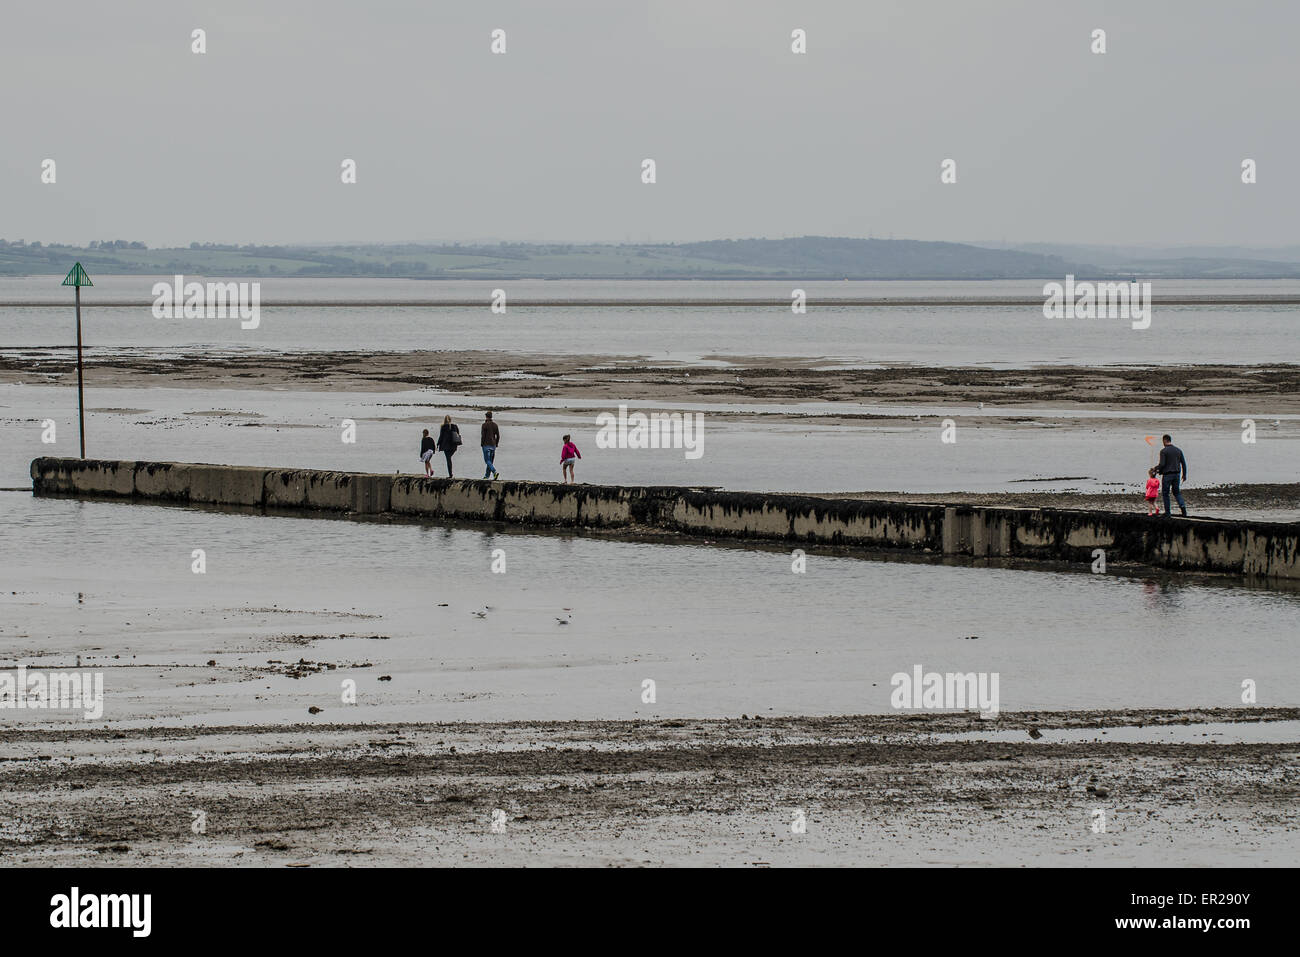 Visitors to the Southend-on-Sea, Essex seaside resort on the Bank Holiday Monday make the best of the overcast weather on the beach Stock Photo